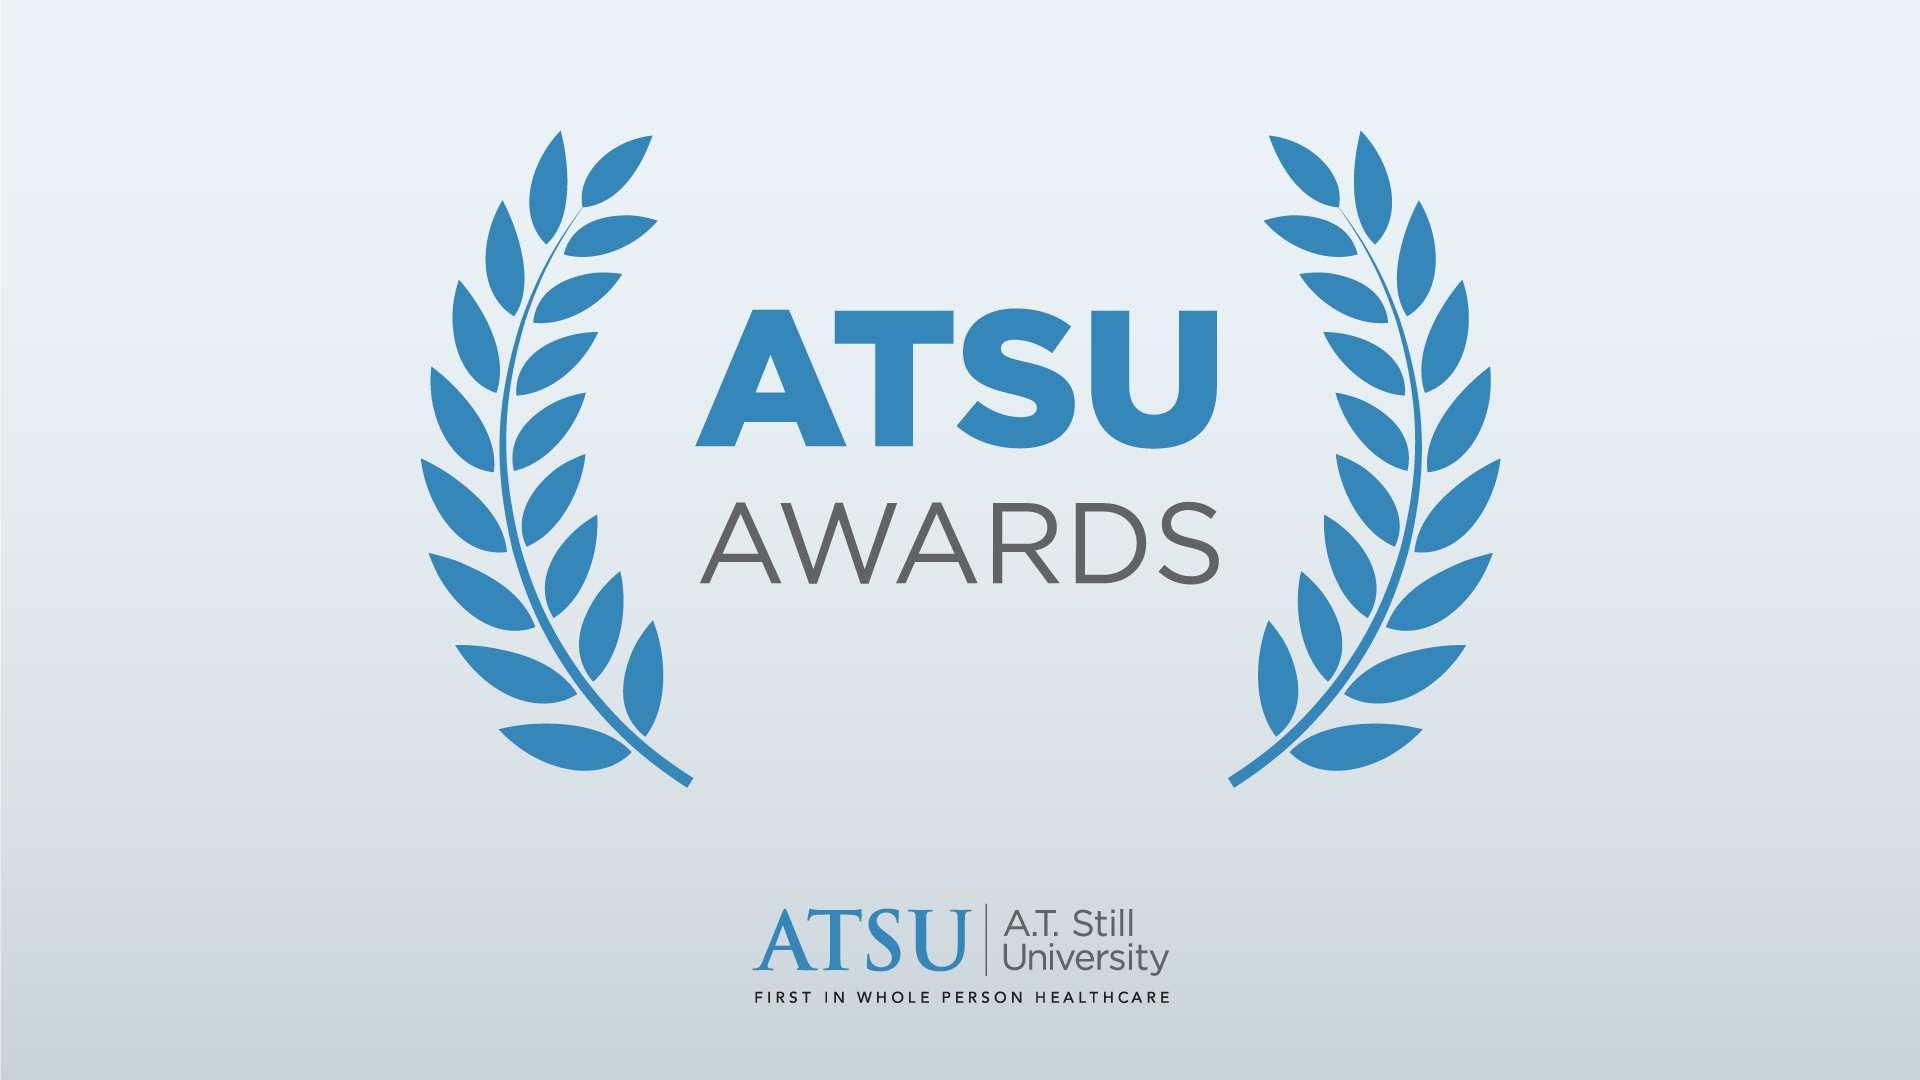 ATSU-ASHS faculty members receive awards for 2021-22 academic year work